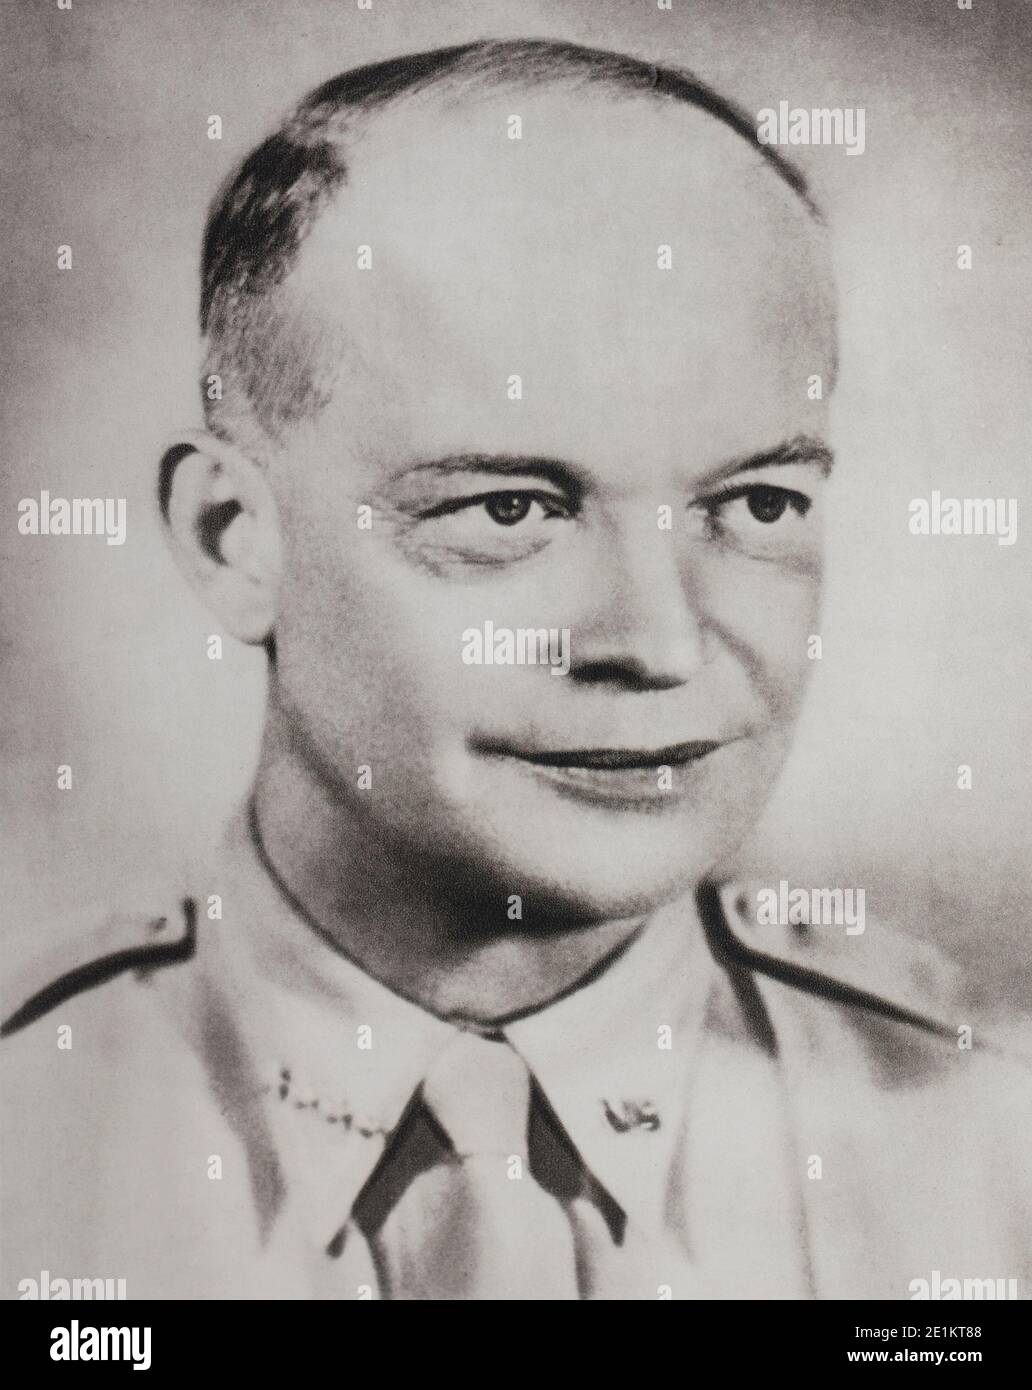 Portrait of General Dwight Eisenhower, Supreme Allied Commander. Dwight David 'Ike' Eisenhower (1890 – 1969) was an American army general and statesma Stock Photo